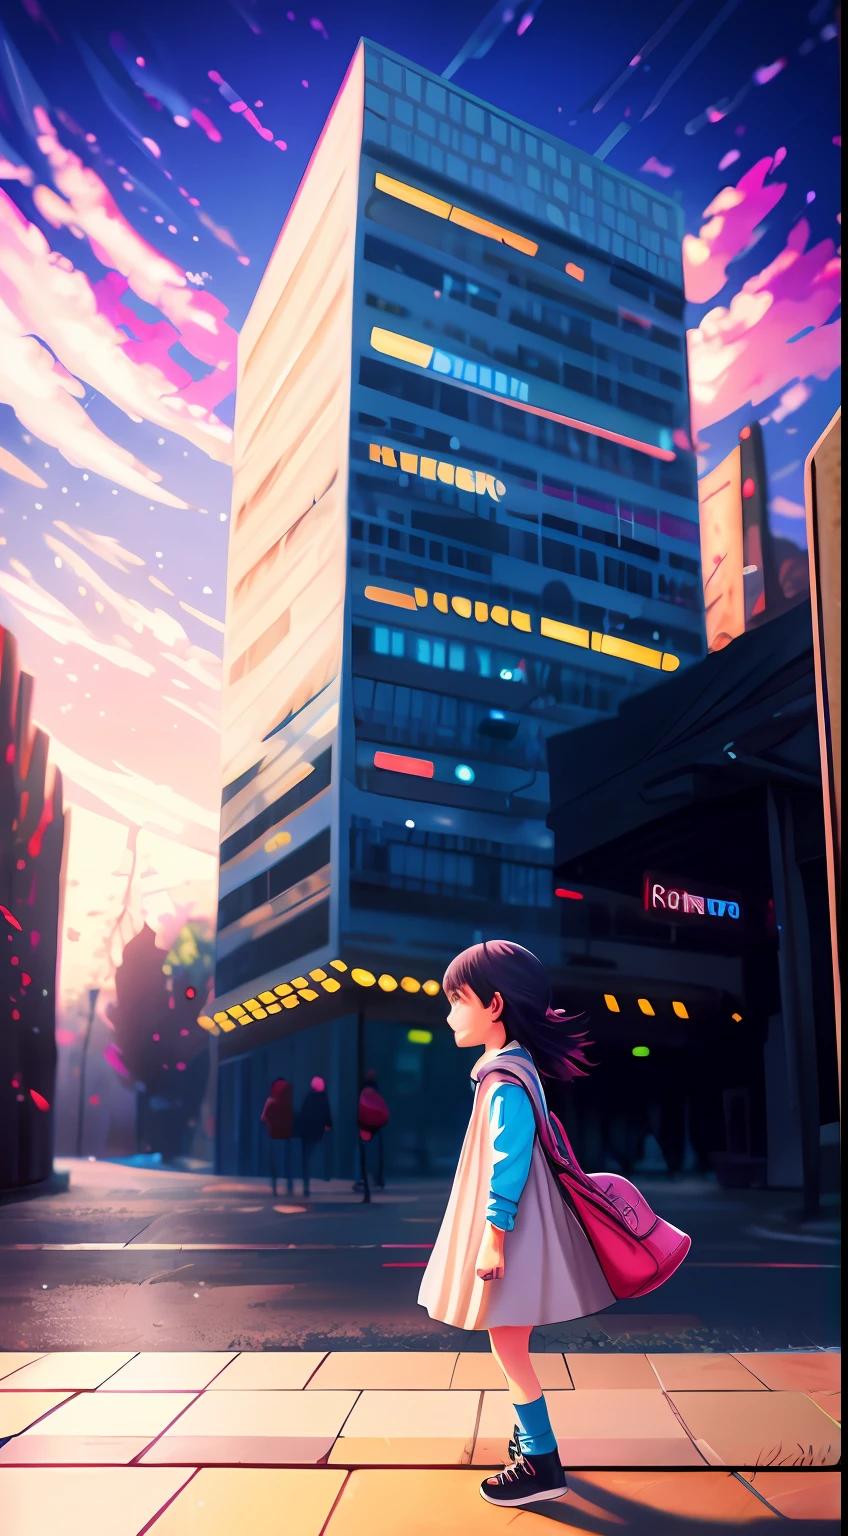 there is a  walking down the street with a eagle,, by makoto shinkai, by Makoto Shinkai, makoto shinkai cyril rolando, style of makoto shinkai, anime. by makoto shinkai, realistic anime 3 d style, artwork in the style of guweiz, in style of makoto shinkai